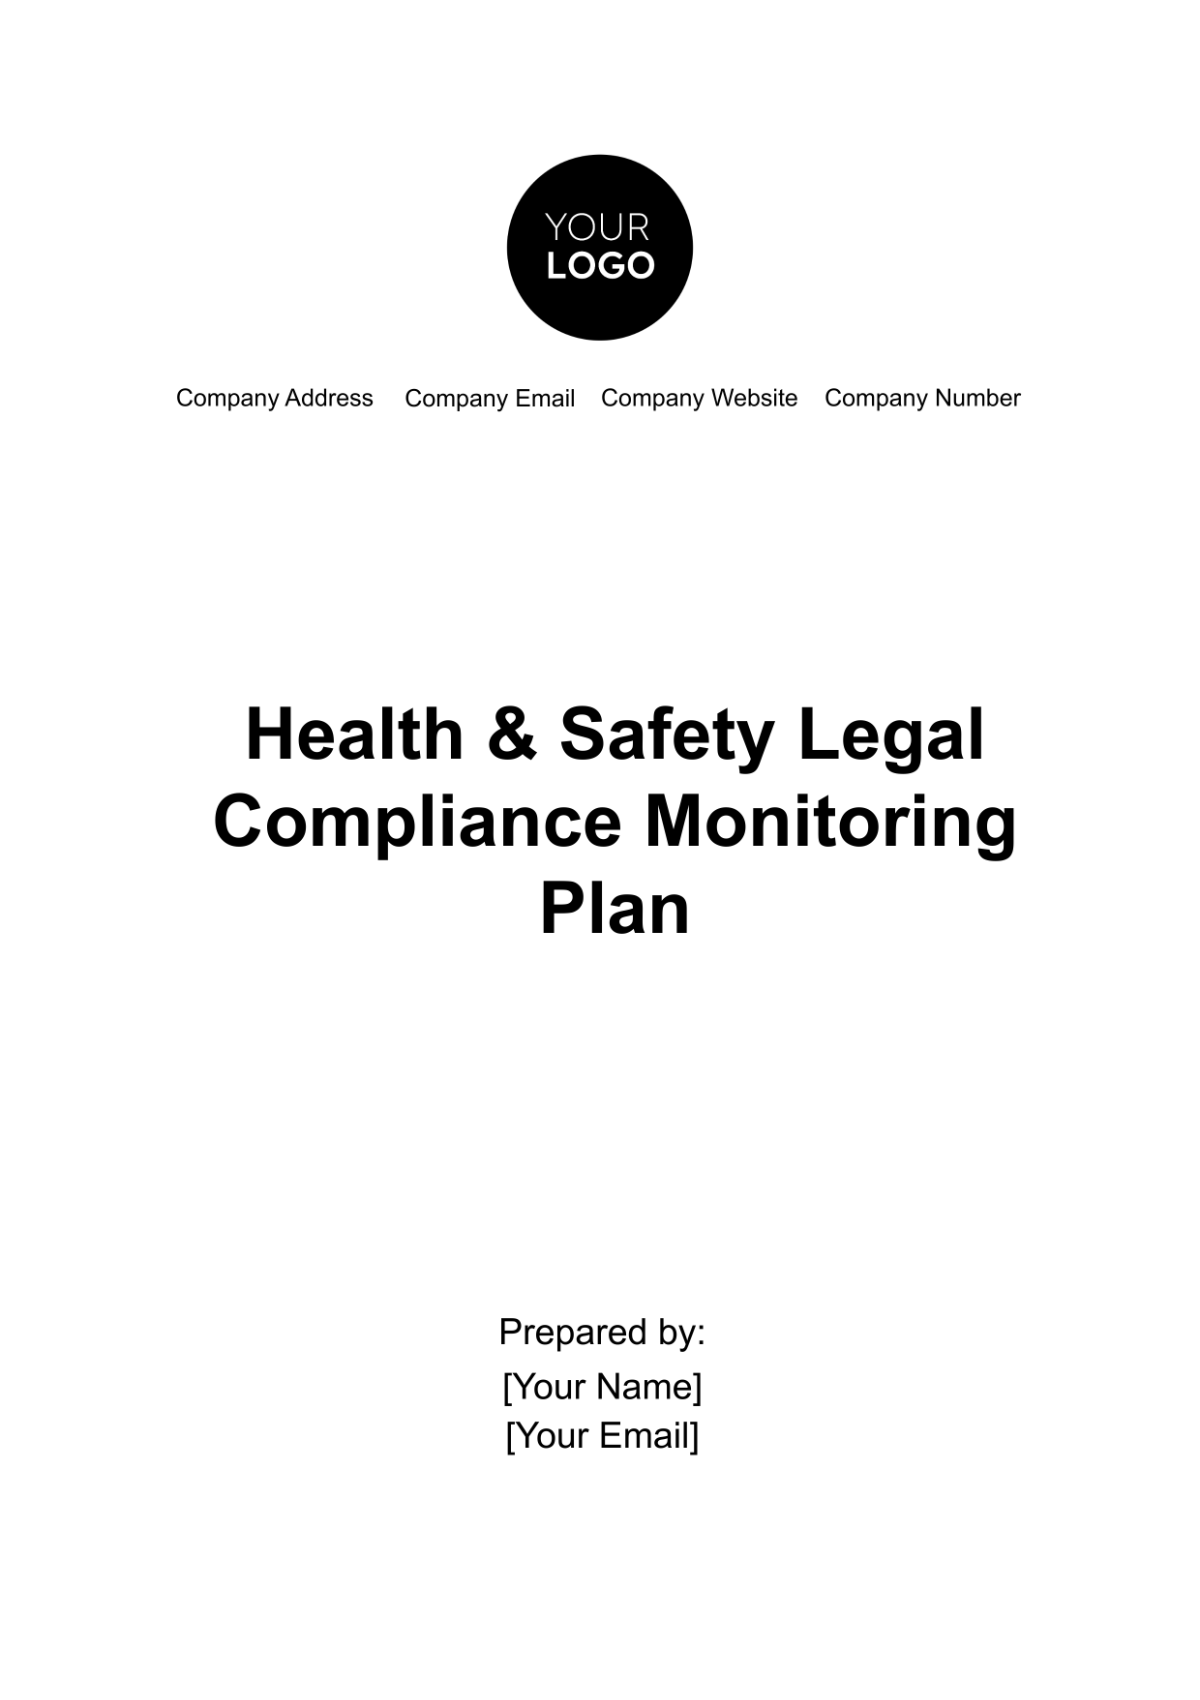 Free Health & Safety Legal Compliance Monitoring Plan Template